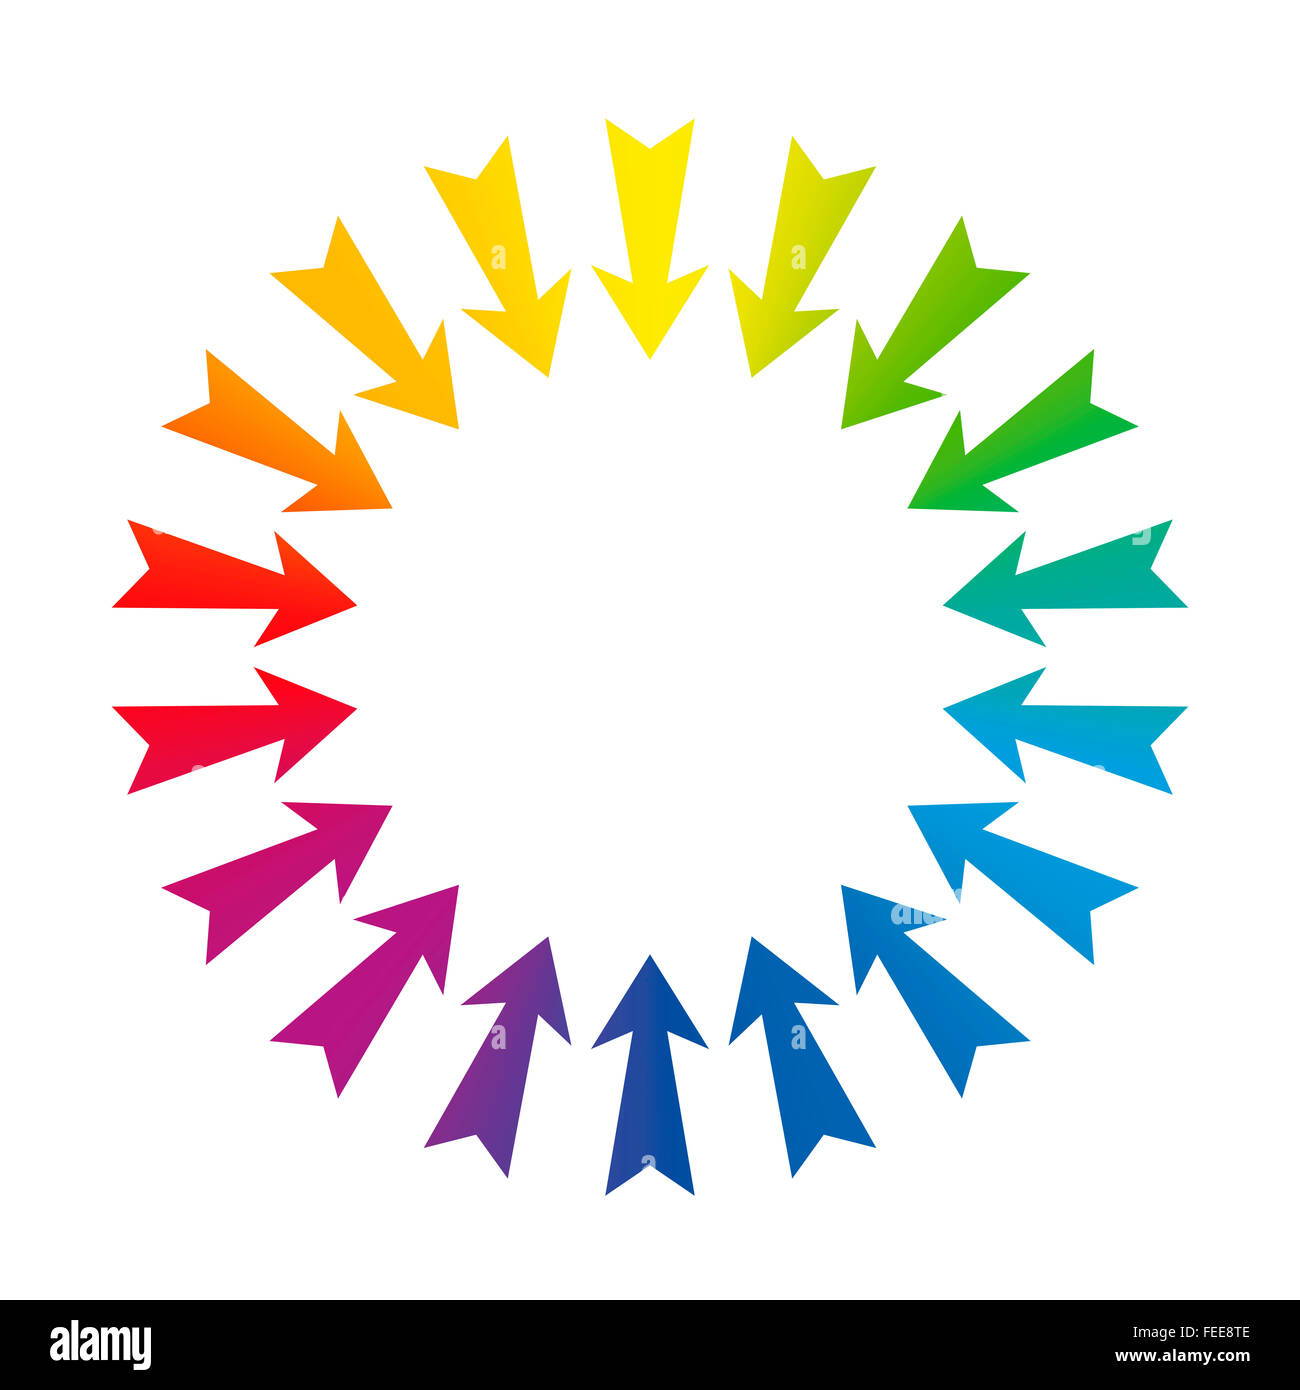 Arrows showing to center - rainbow colored - illustration on white background. Stock Photo